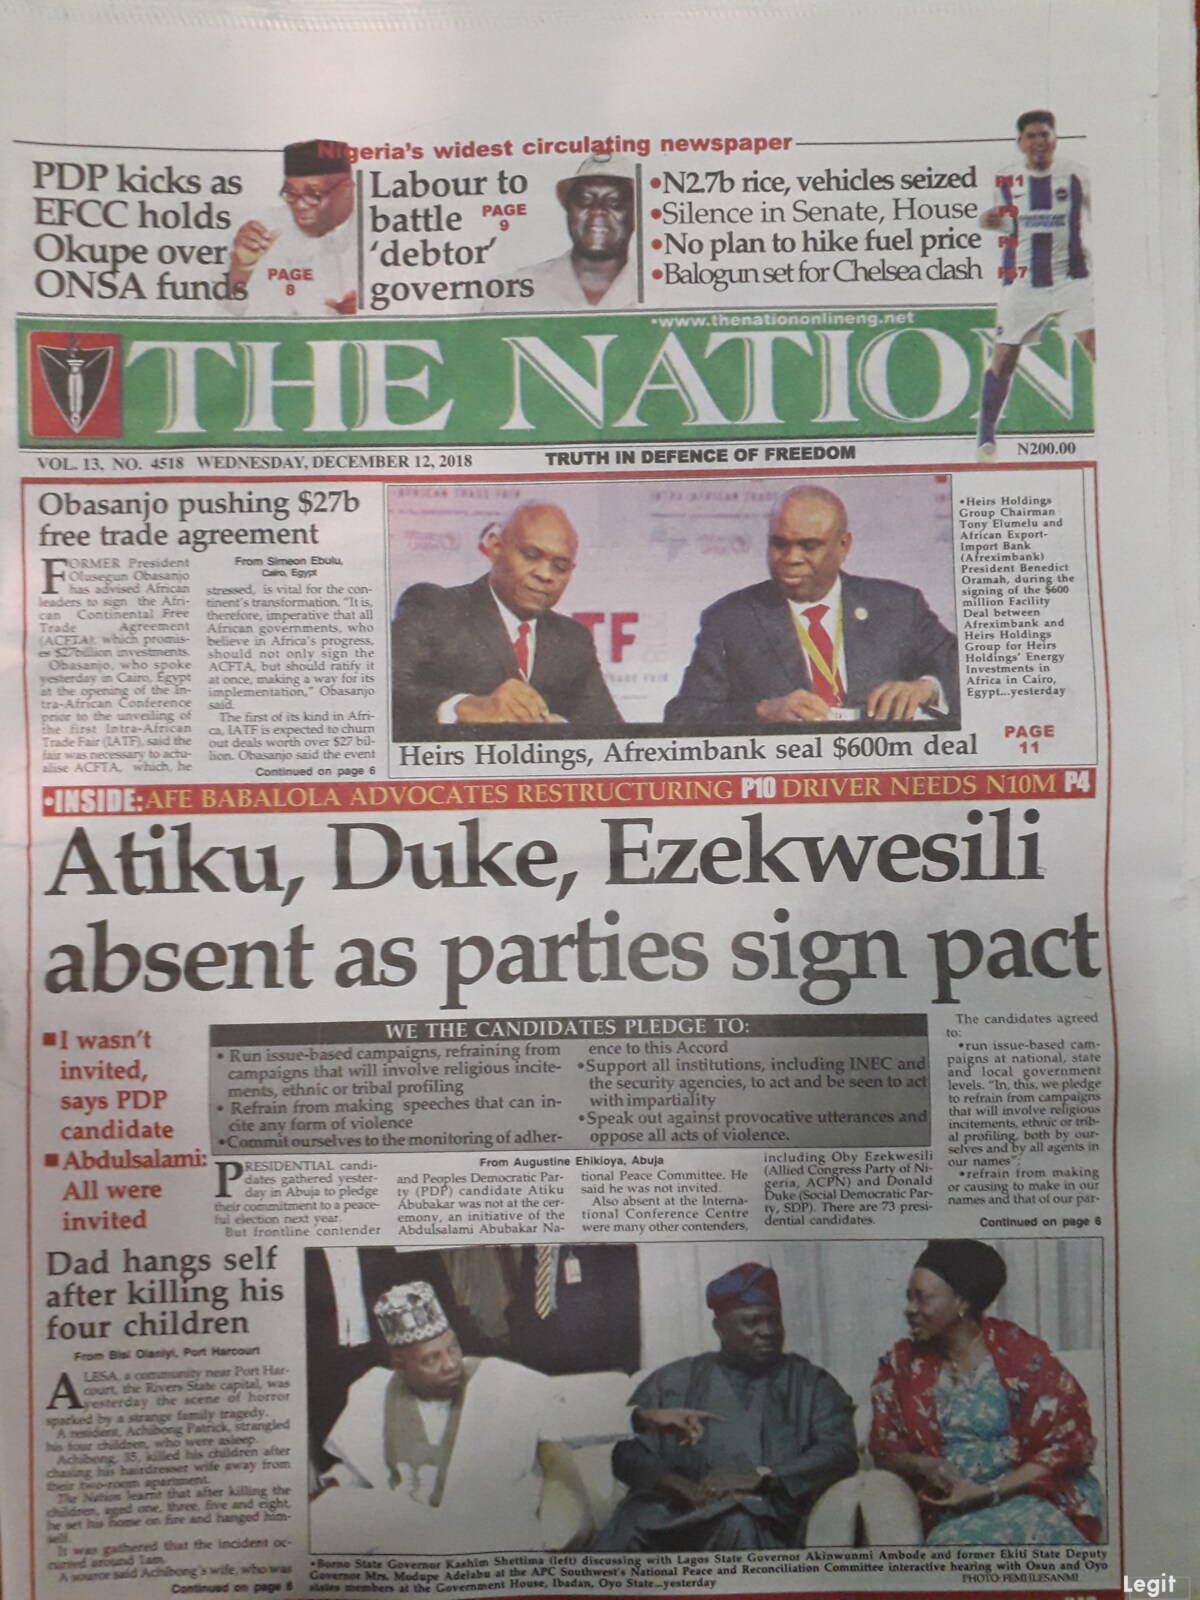 The Nation newspaper review of Wednesday, December 12. Credit: Legit.ng snapshot.